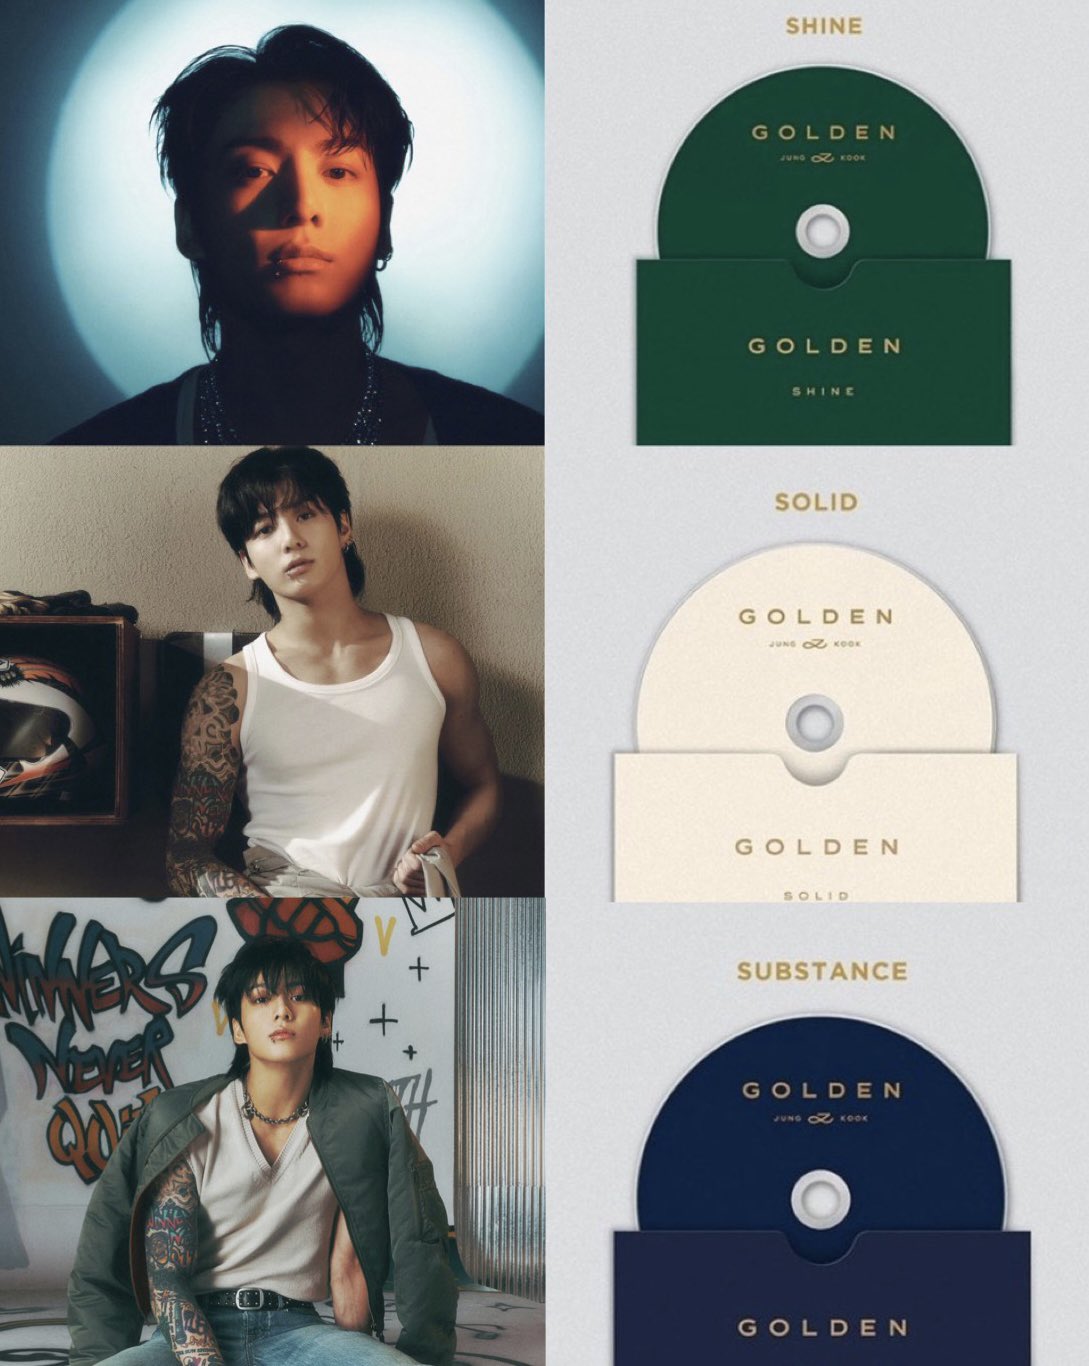 mirakoo on X: Jungkook took his golden maknae name and created his album  concept by metaphorically applying the characteristics of gold to himself.  Gold is bright (shine), durable (solid) and found in